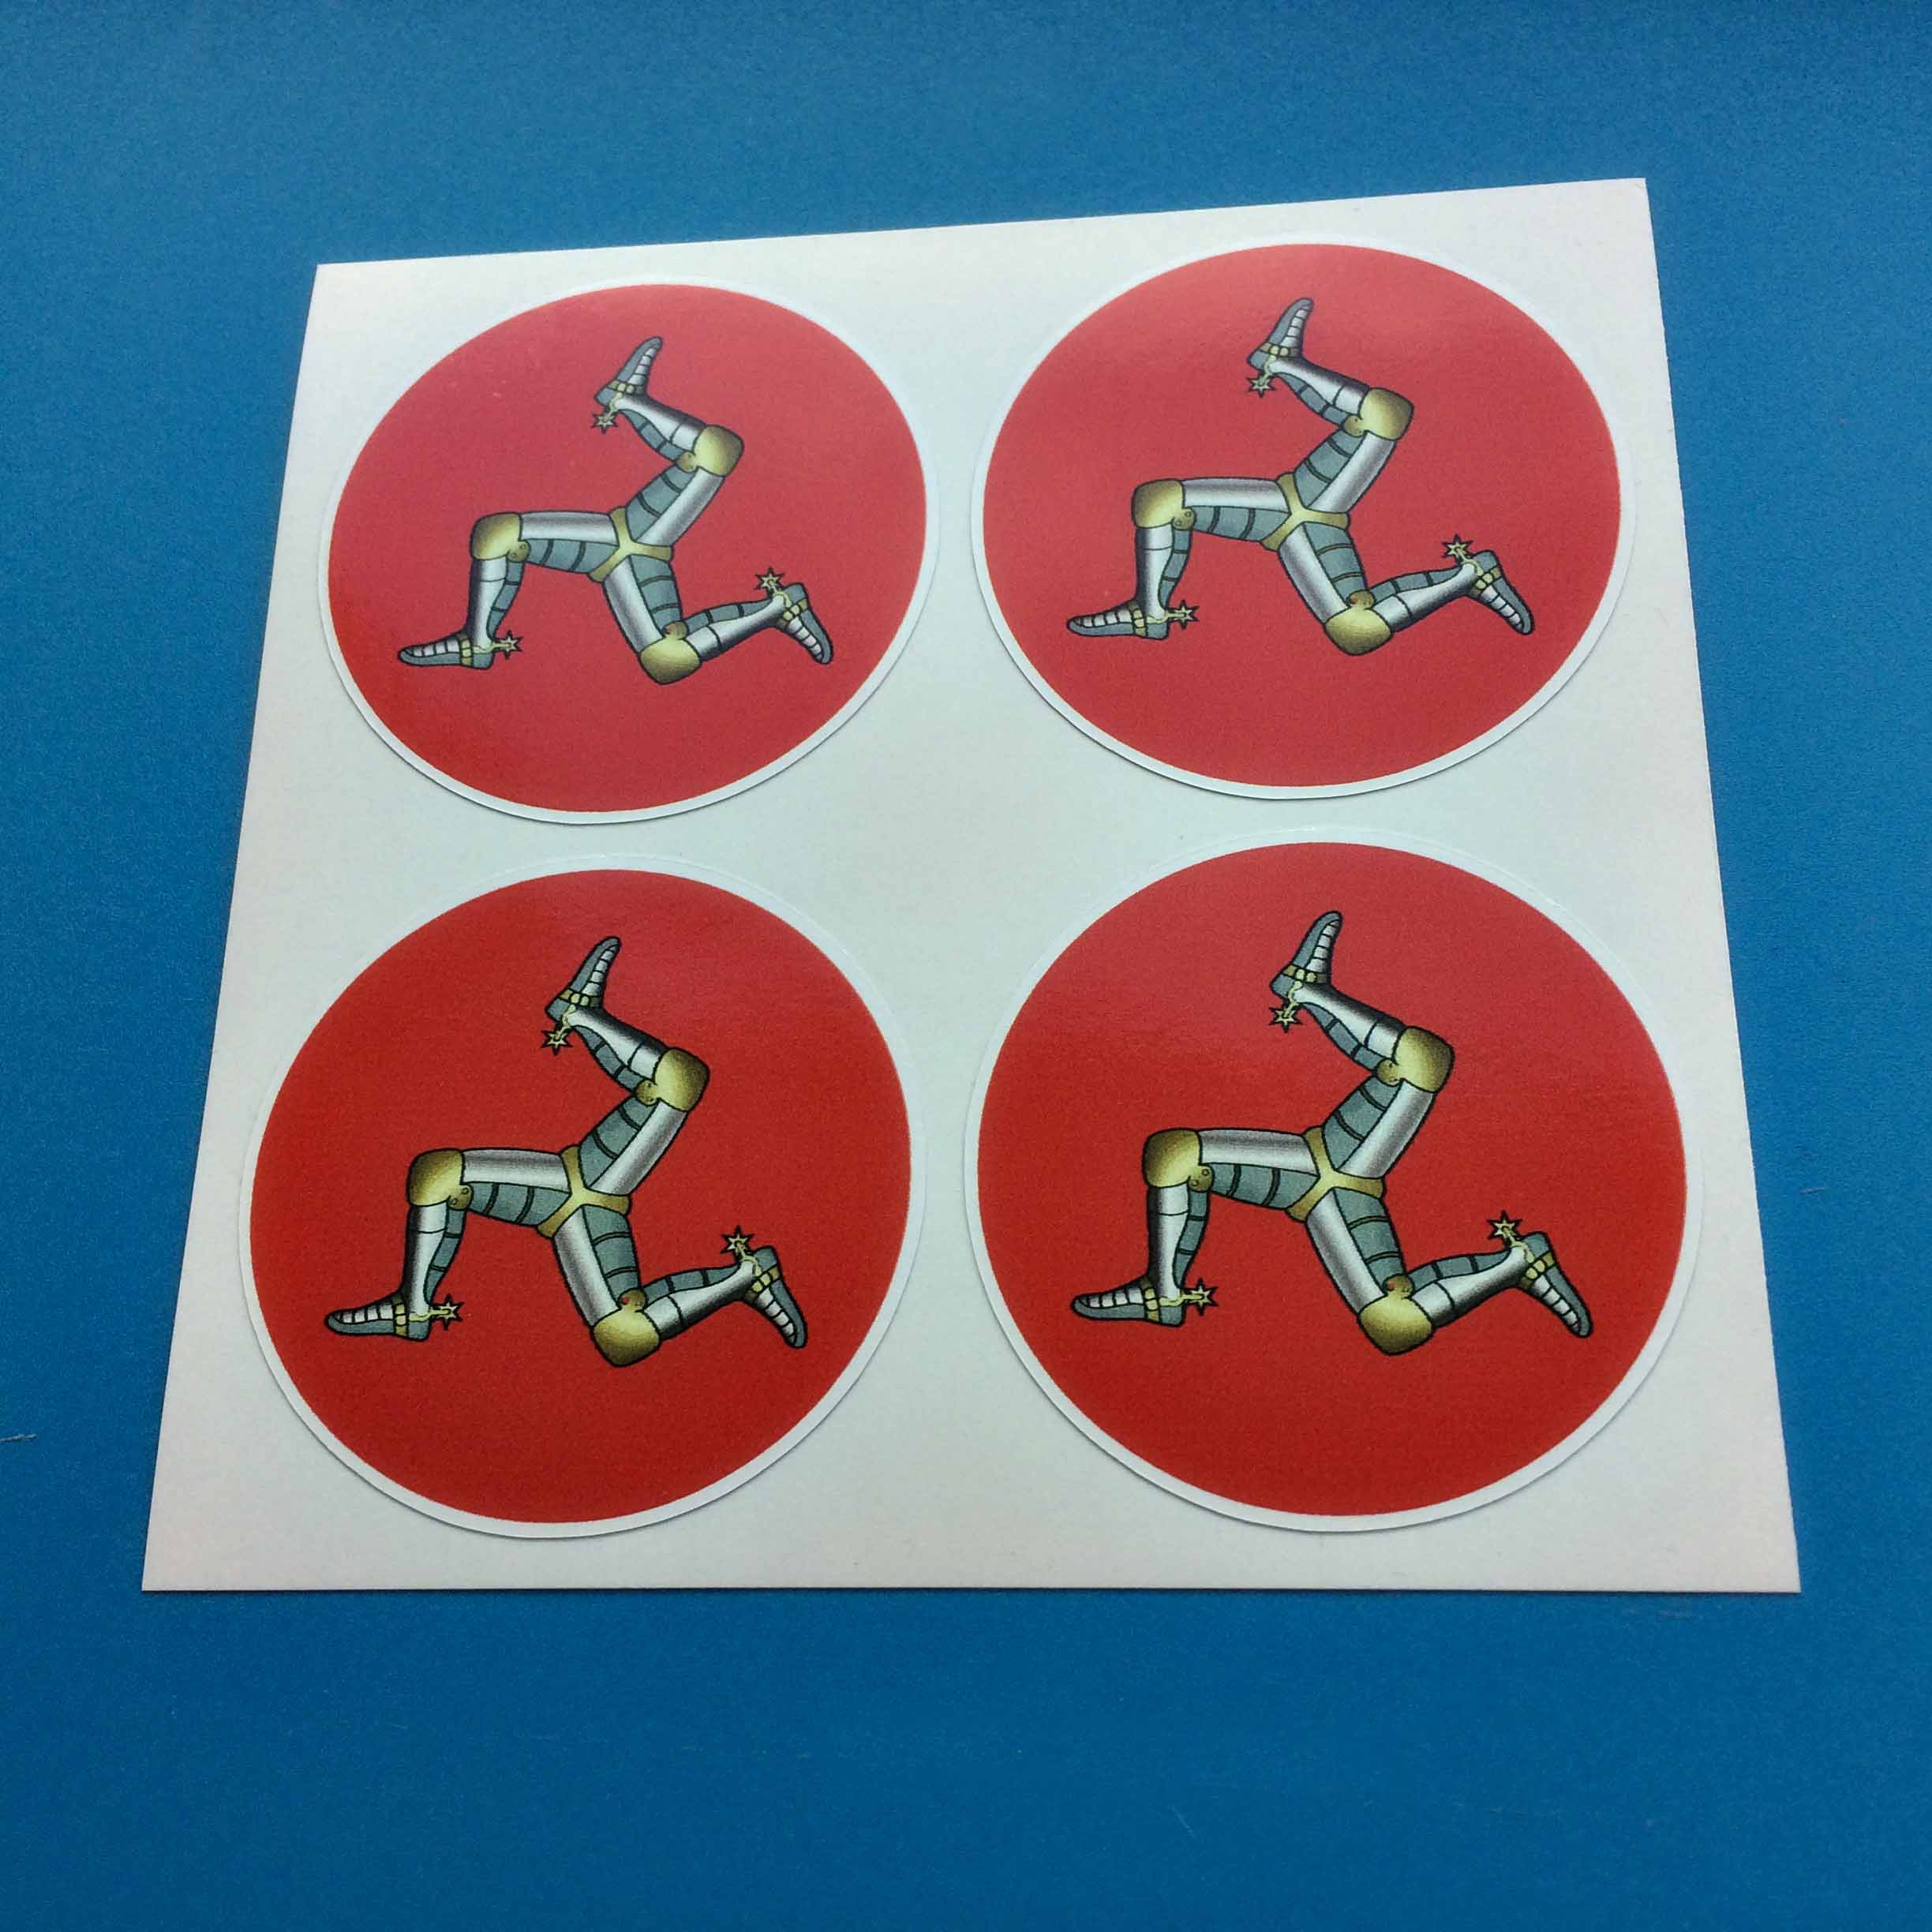 Three armoured legs with golden spurs on a red circular background.